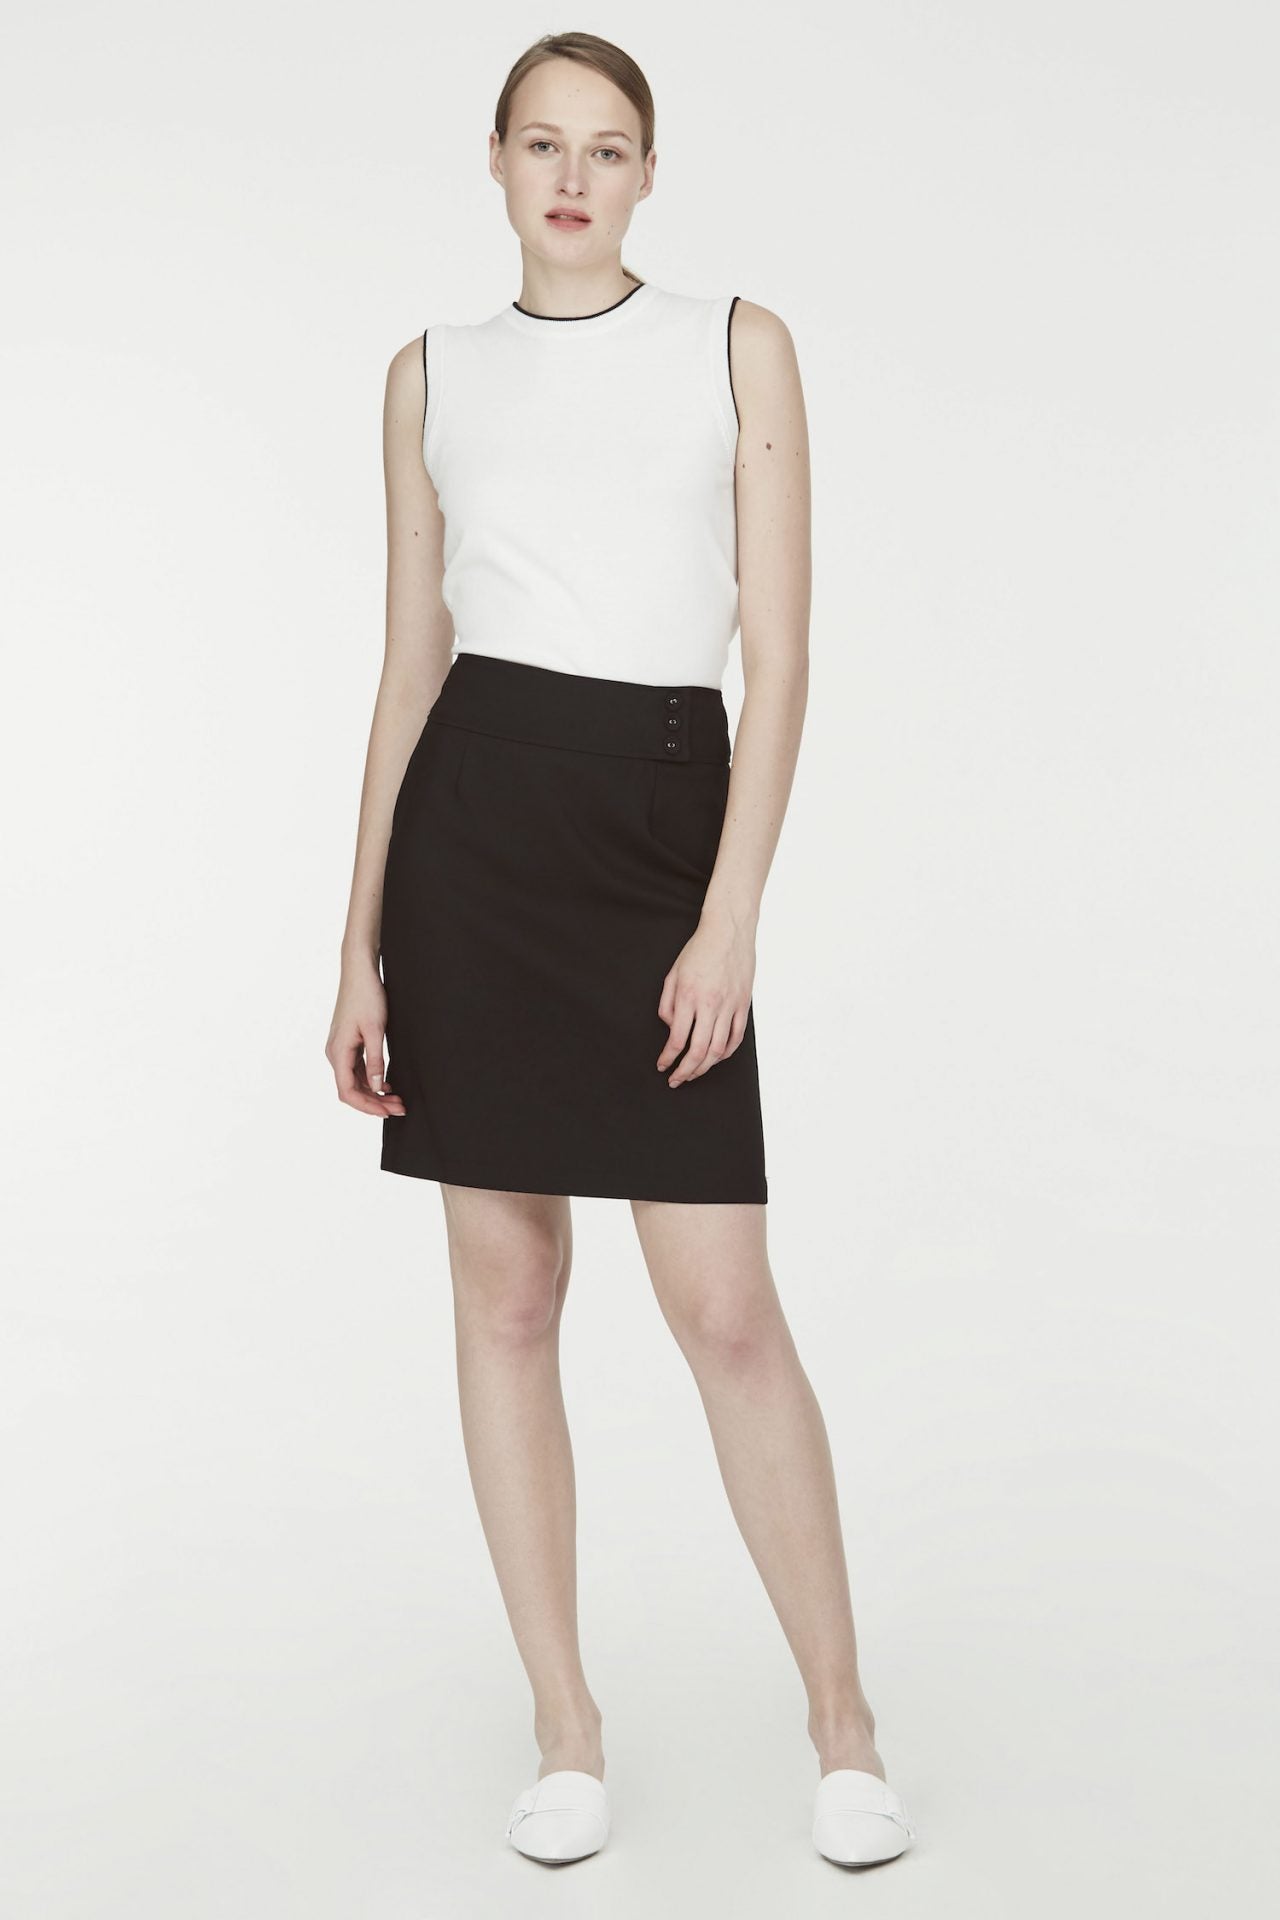 ASK 8091 BLACK BUTTONED PENCIL SKIRT